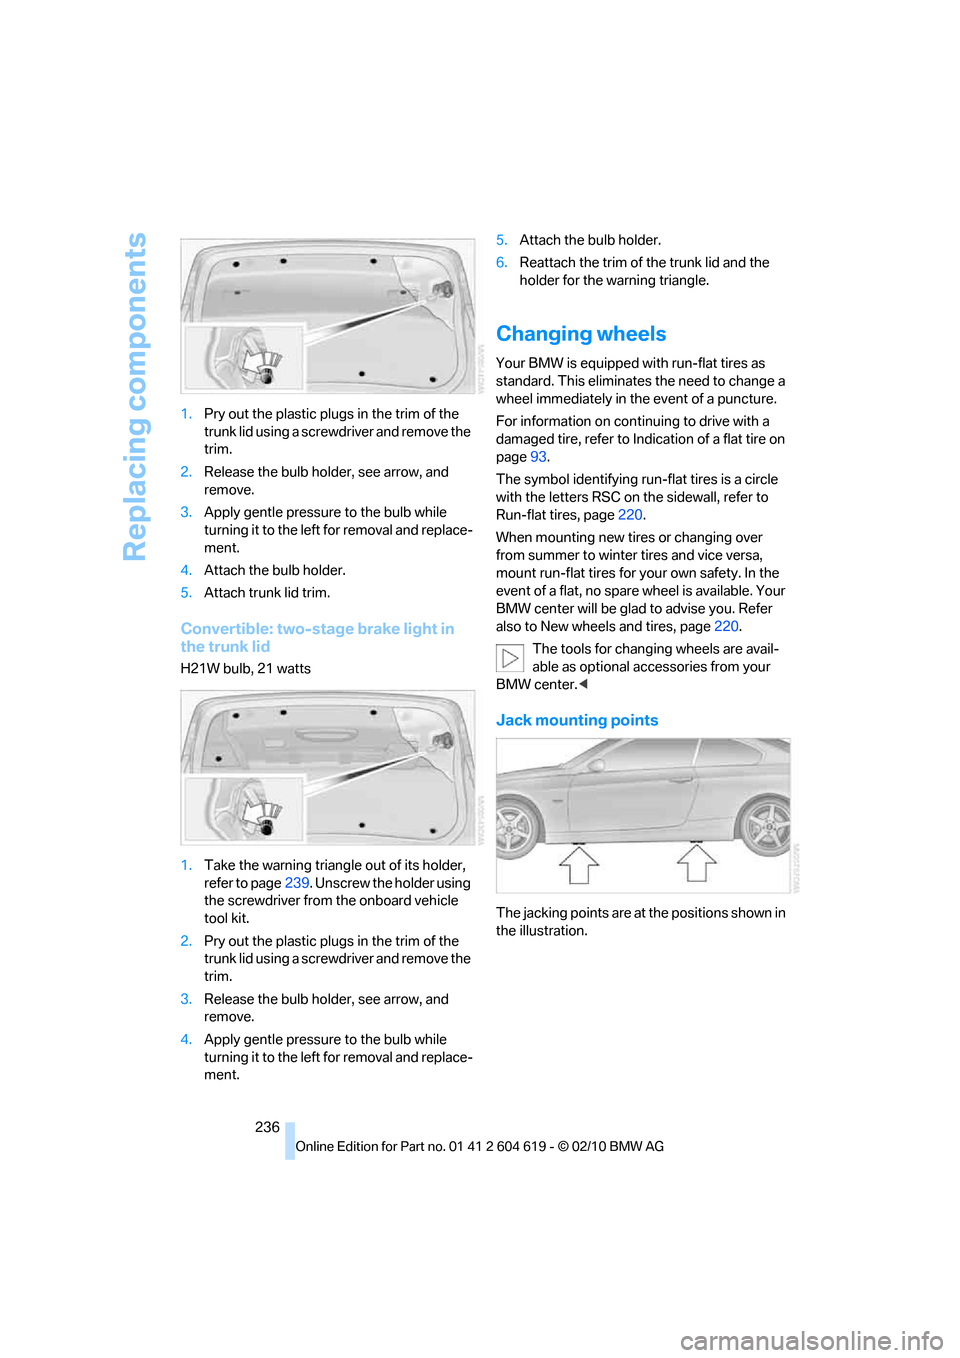 BMW 335IS COUPE 2011 E93 Owners Manual Replacing components
236 1.Pry out the plastic plugs in the trim of the 
trunk lid using a screwdriver and remove the 
trim.
2.Release the bulb holder, see arrow, and 
remove.
3.Apply gentle pressure 